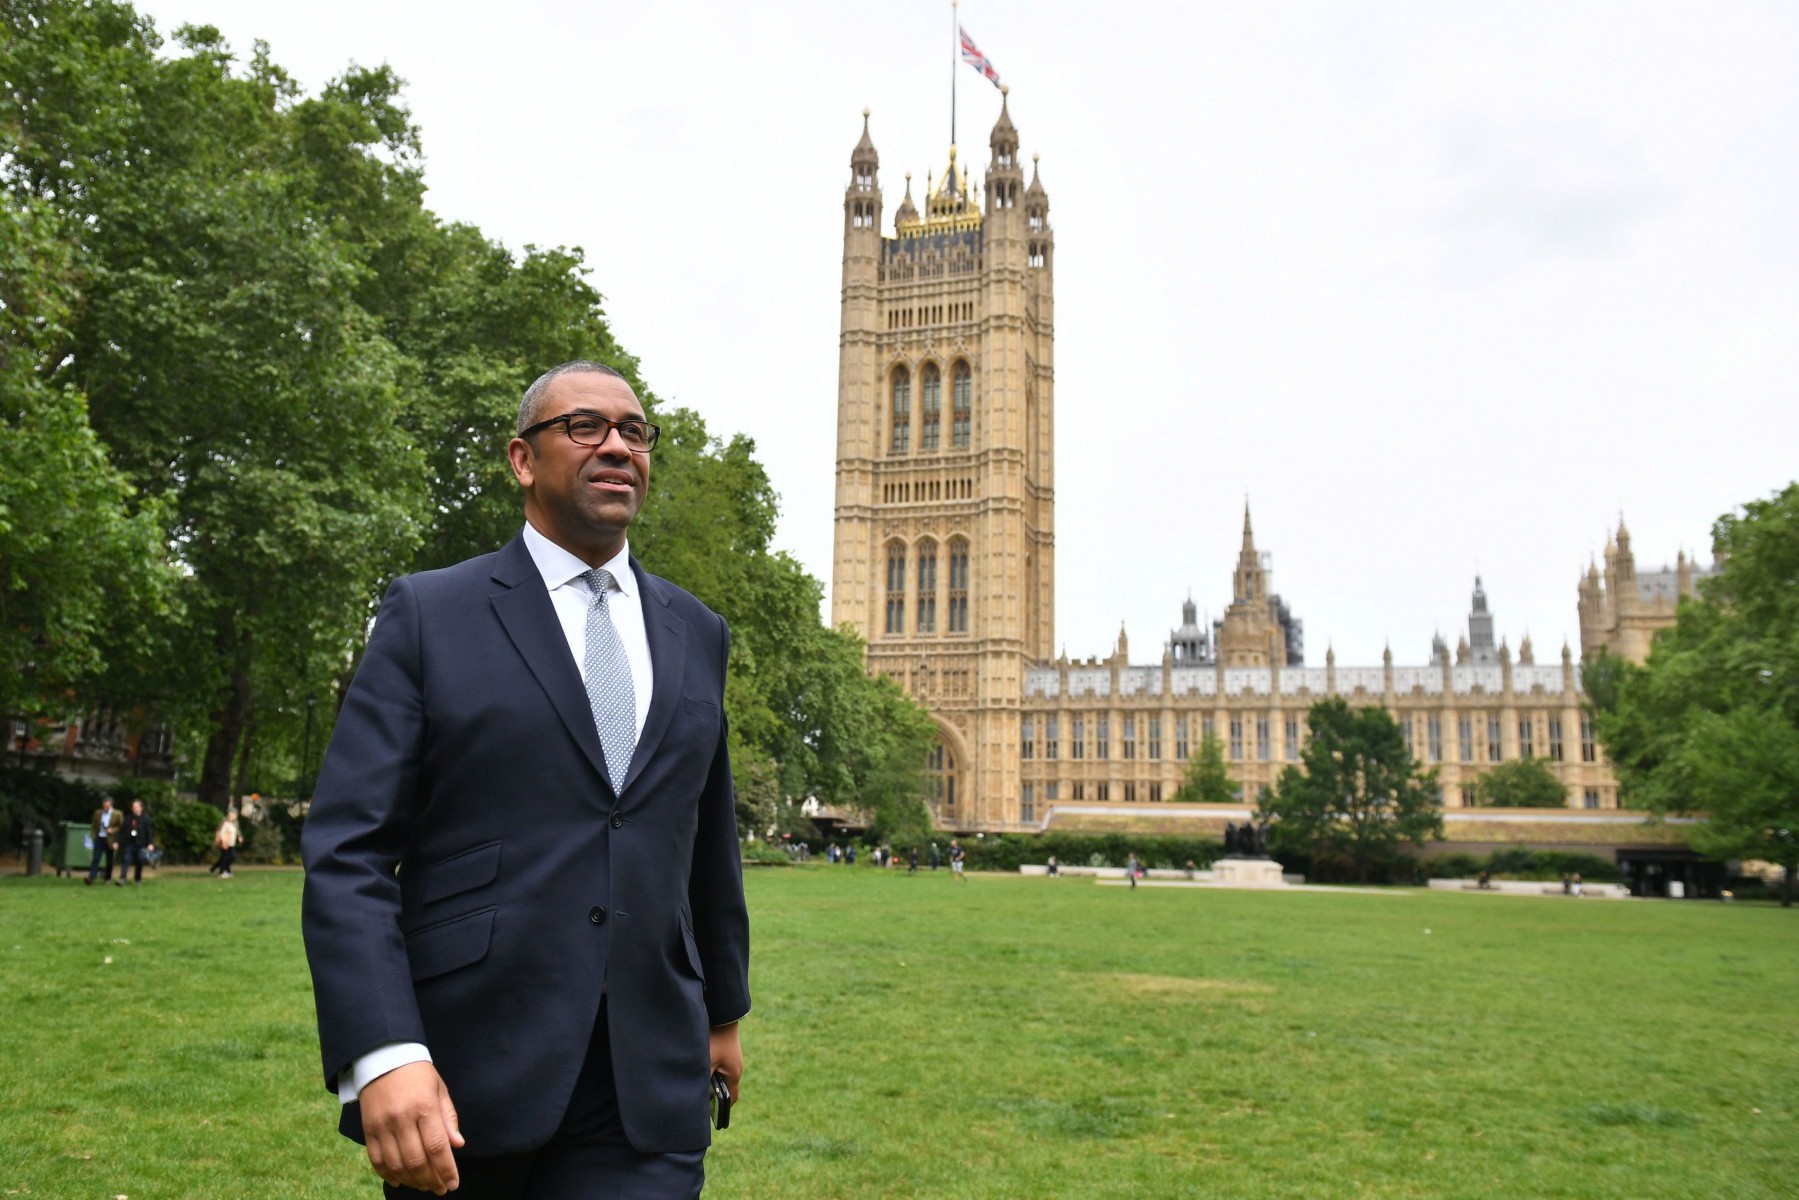 James Cleverly put his name forward to replace Theresa May on May 28, but backed out on June 4